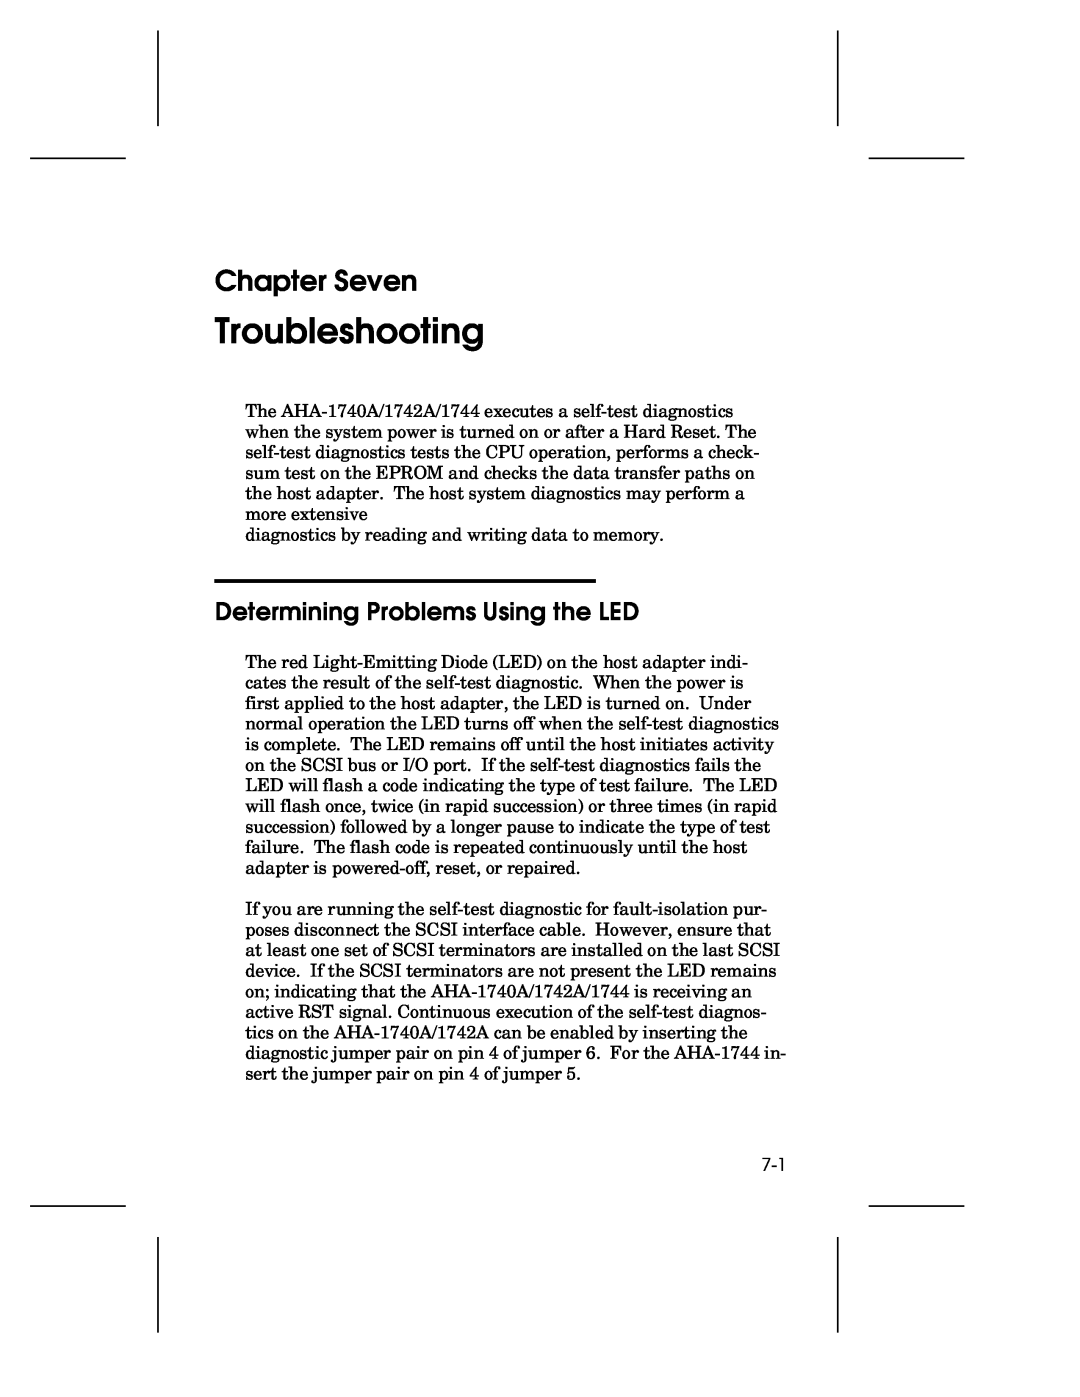 Adaptec AHA-1740A, 1742A, 1744 user manual Troubleshooting, Chapter Seven, Determining Problems Using the LED 